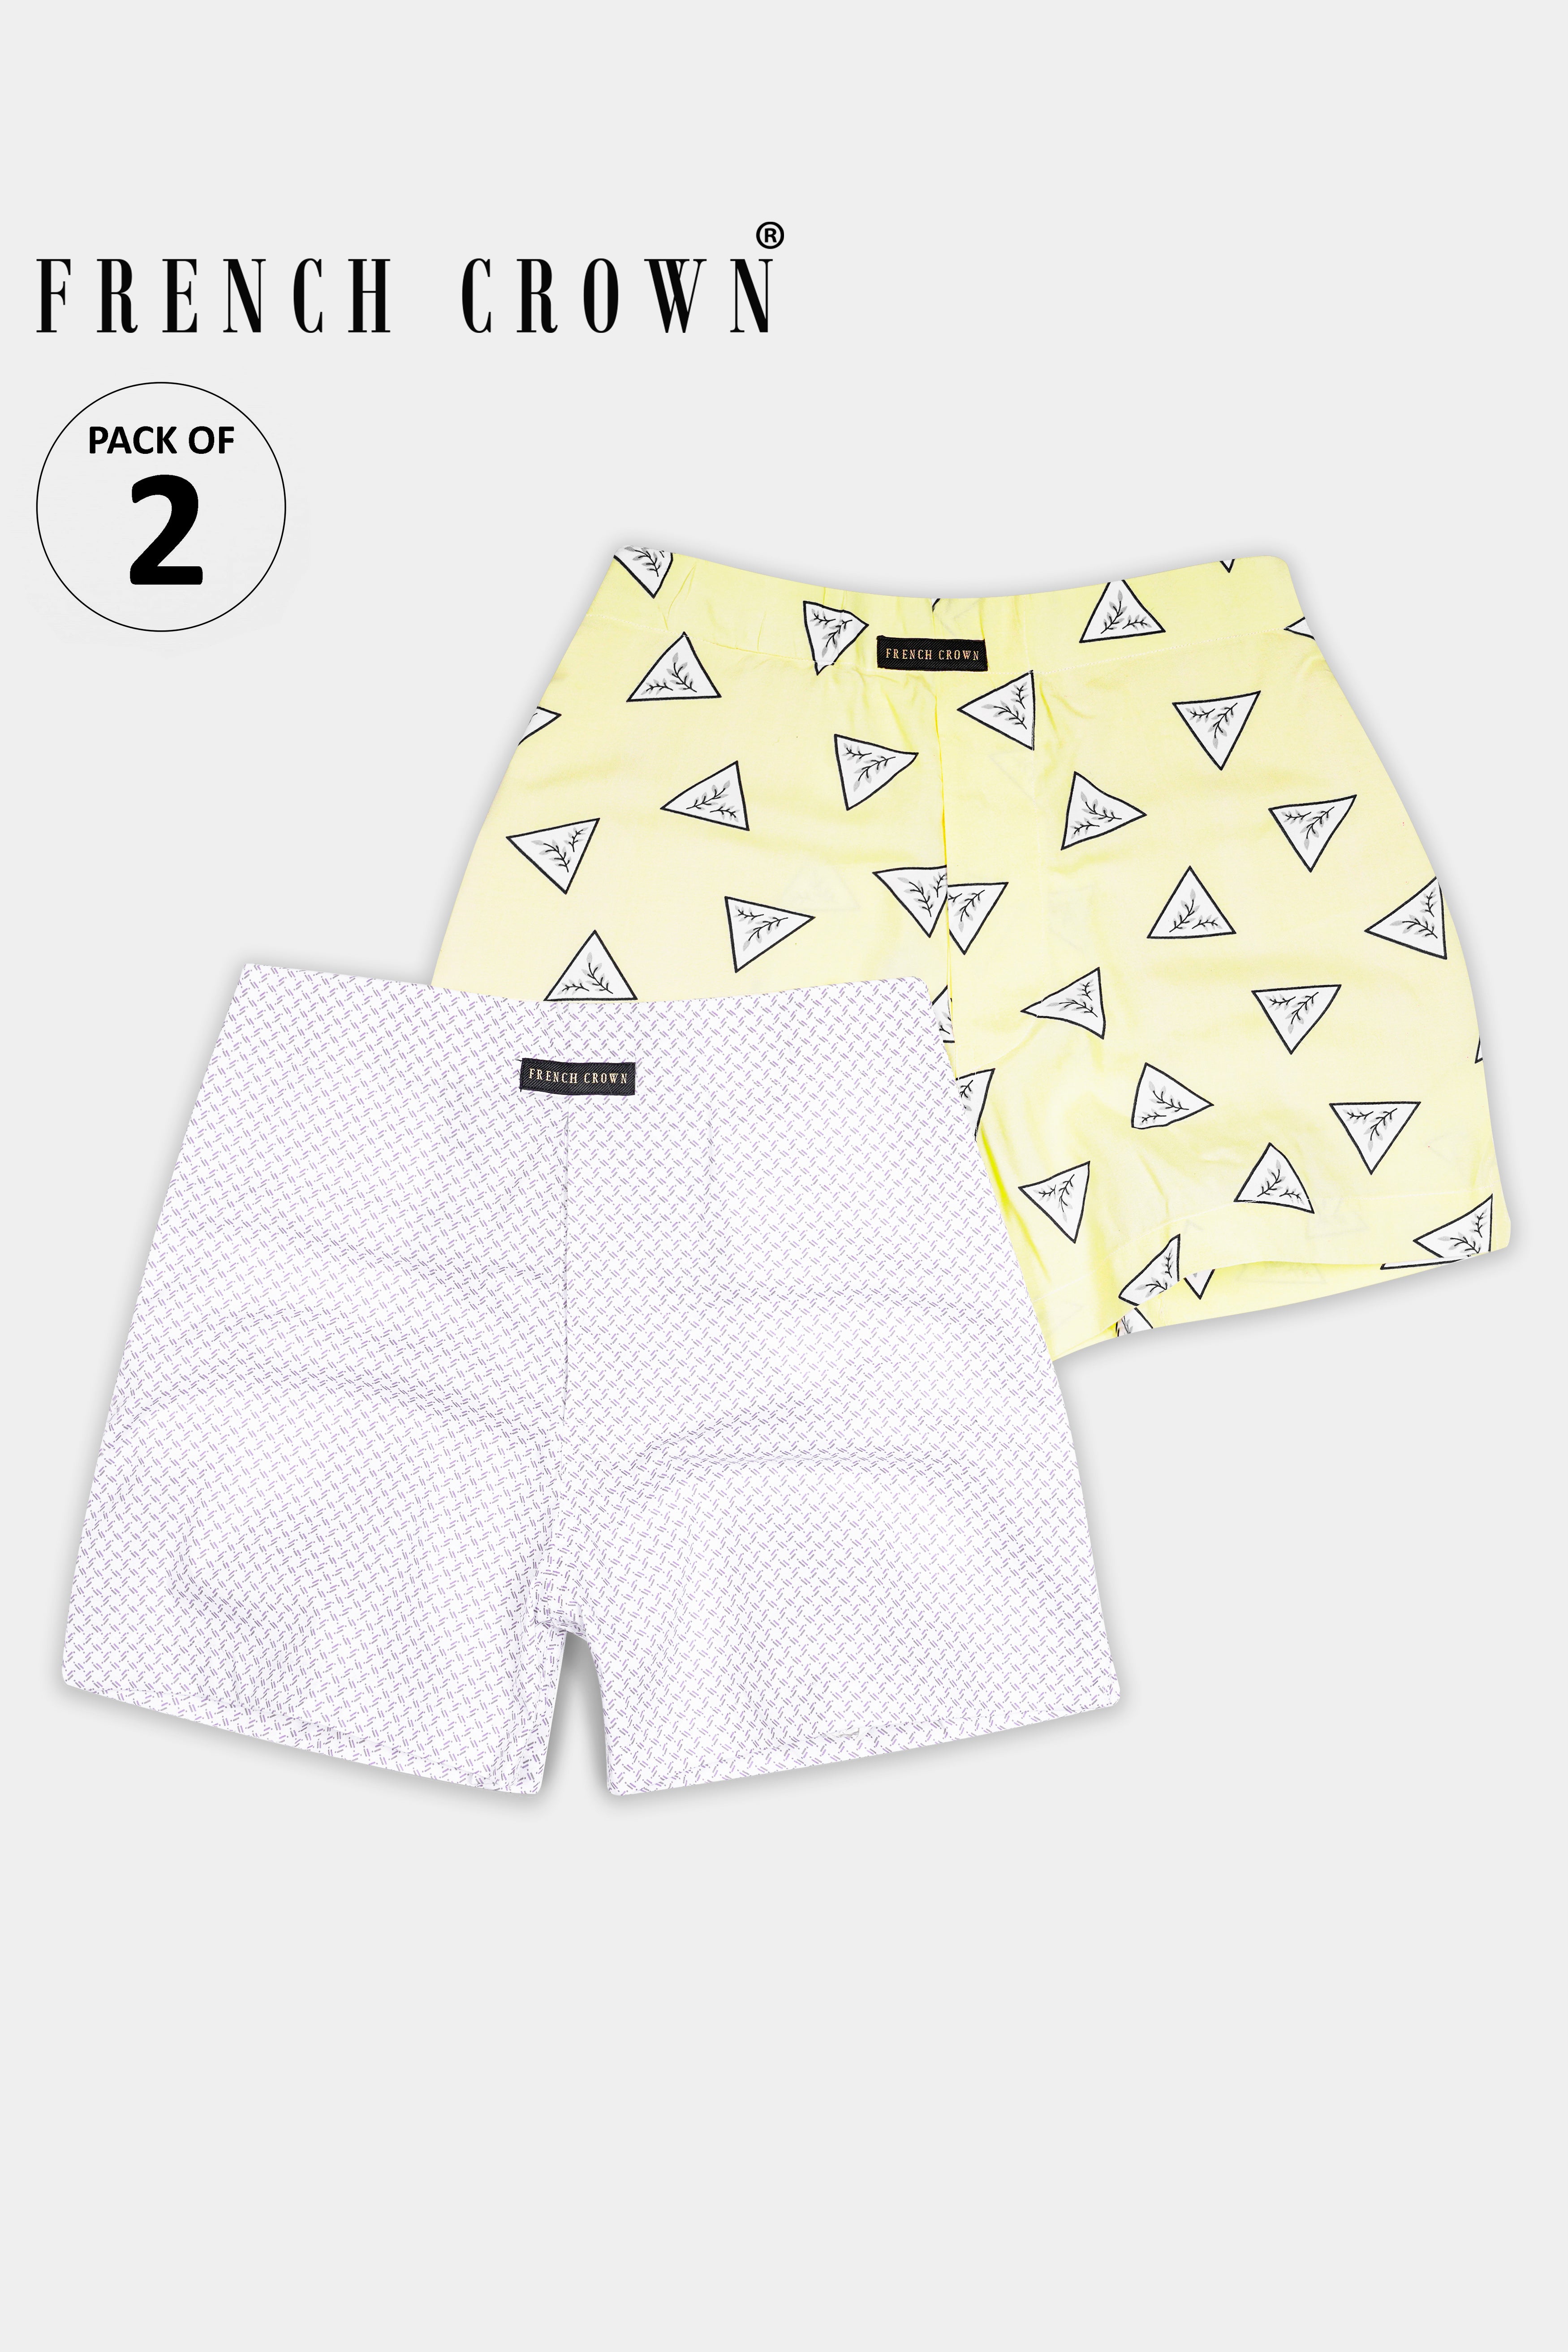 Astra Yellow Triangle Printed and Bright White With Comet Brown Printed Premium Cotton Boxers BX556-BX565-28, BX556-BX565-30, BX556-BX565-32, BX556-BX565-34, BX556-BX565-36, BX556-BX565-38, BX556-BX565-40, BX556-BX565-42, BX556-BX565-44